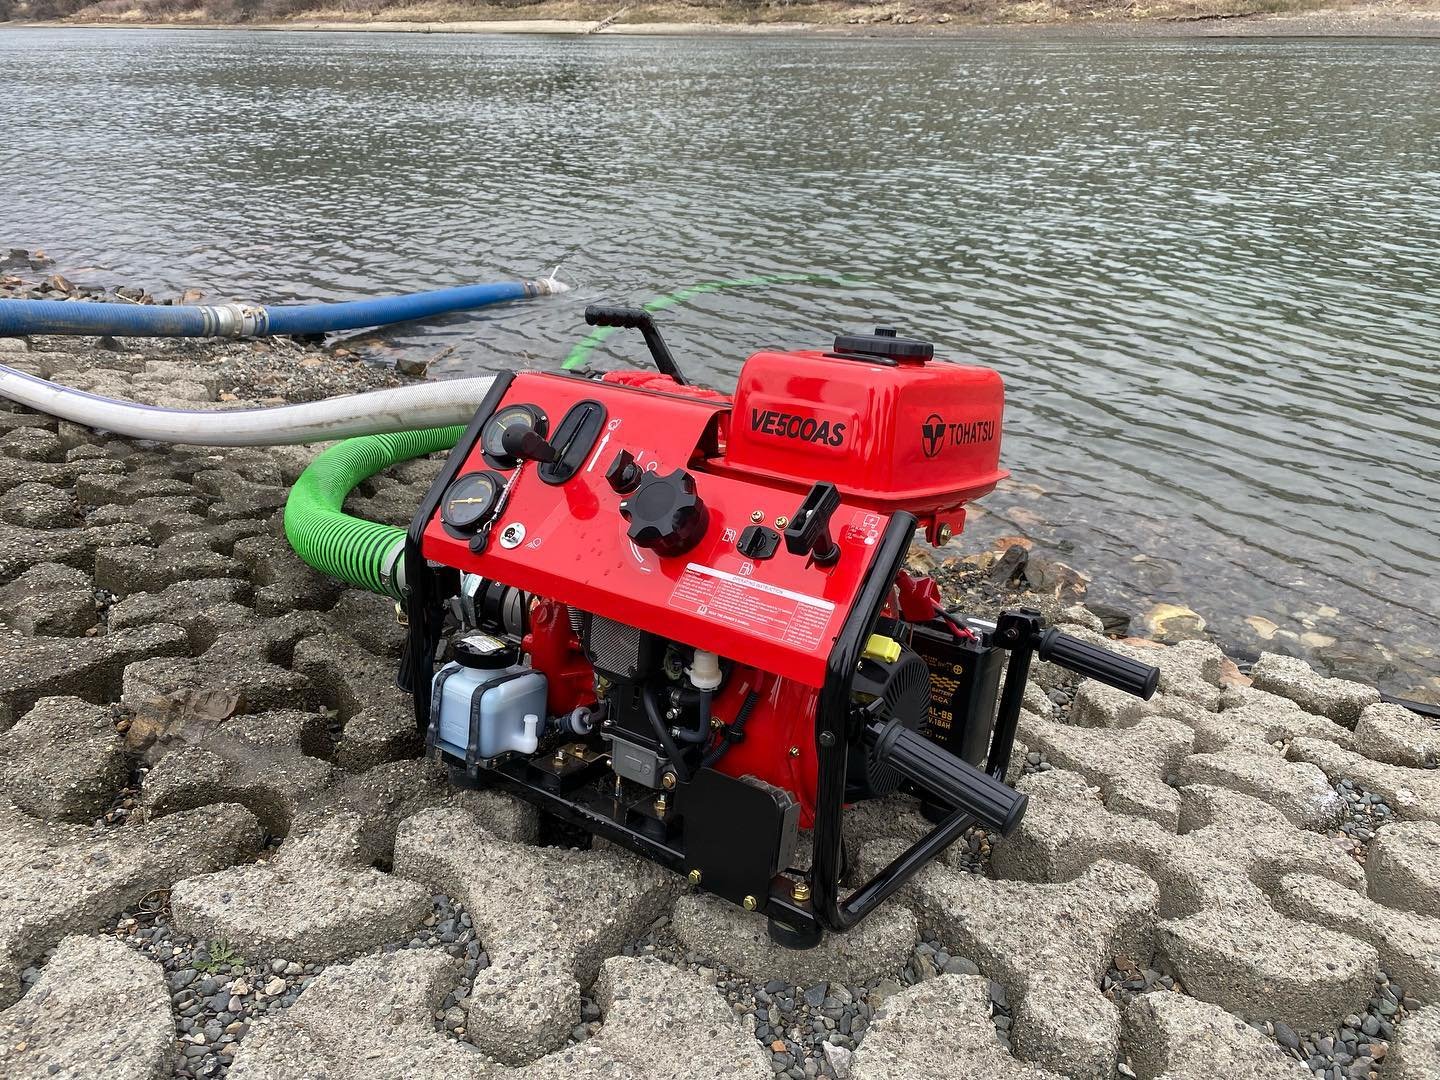 Weather is starting to heat up in BC! Delta is getting geared up with commercial quality, Tohatsu portable fire pumps which offer our customers some serious water power to help protect their assets from the threat of wildfire. 

Be prepared this wild